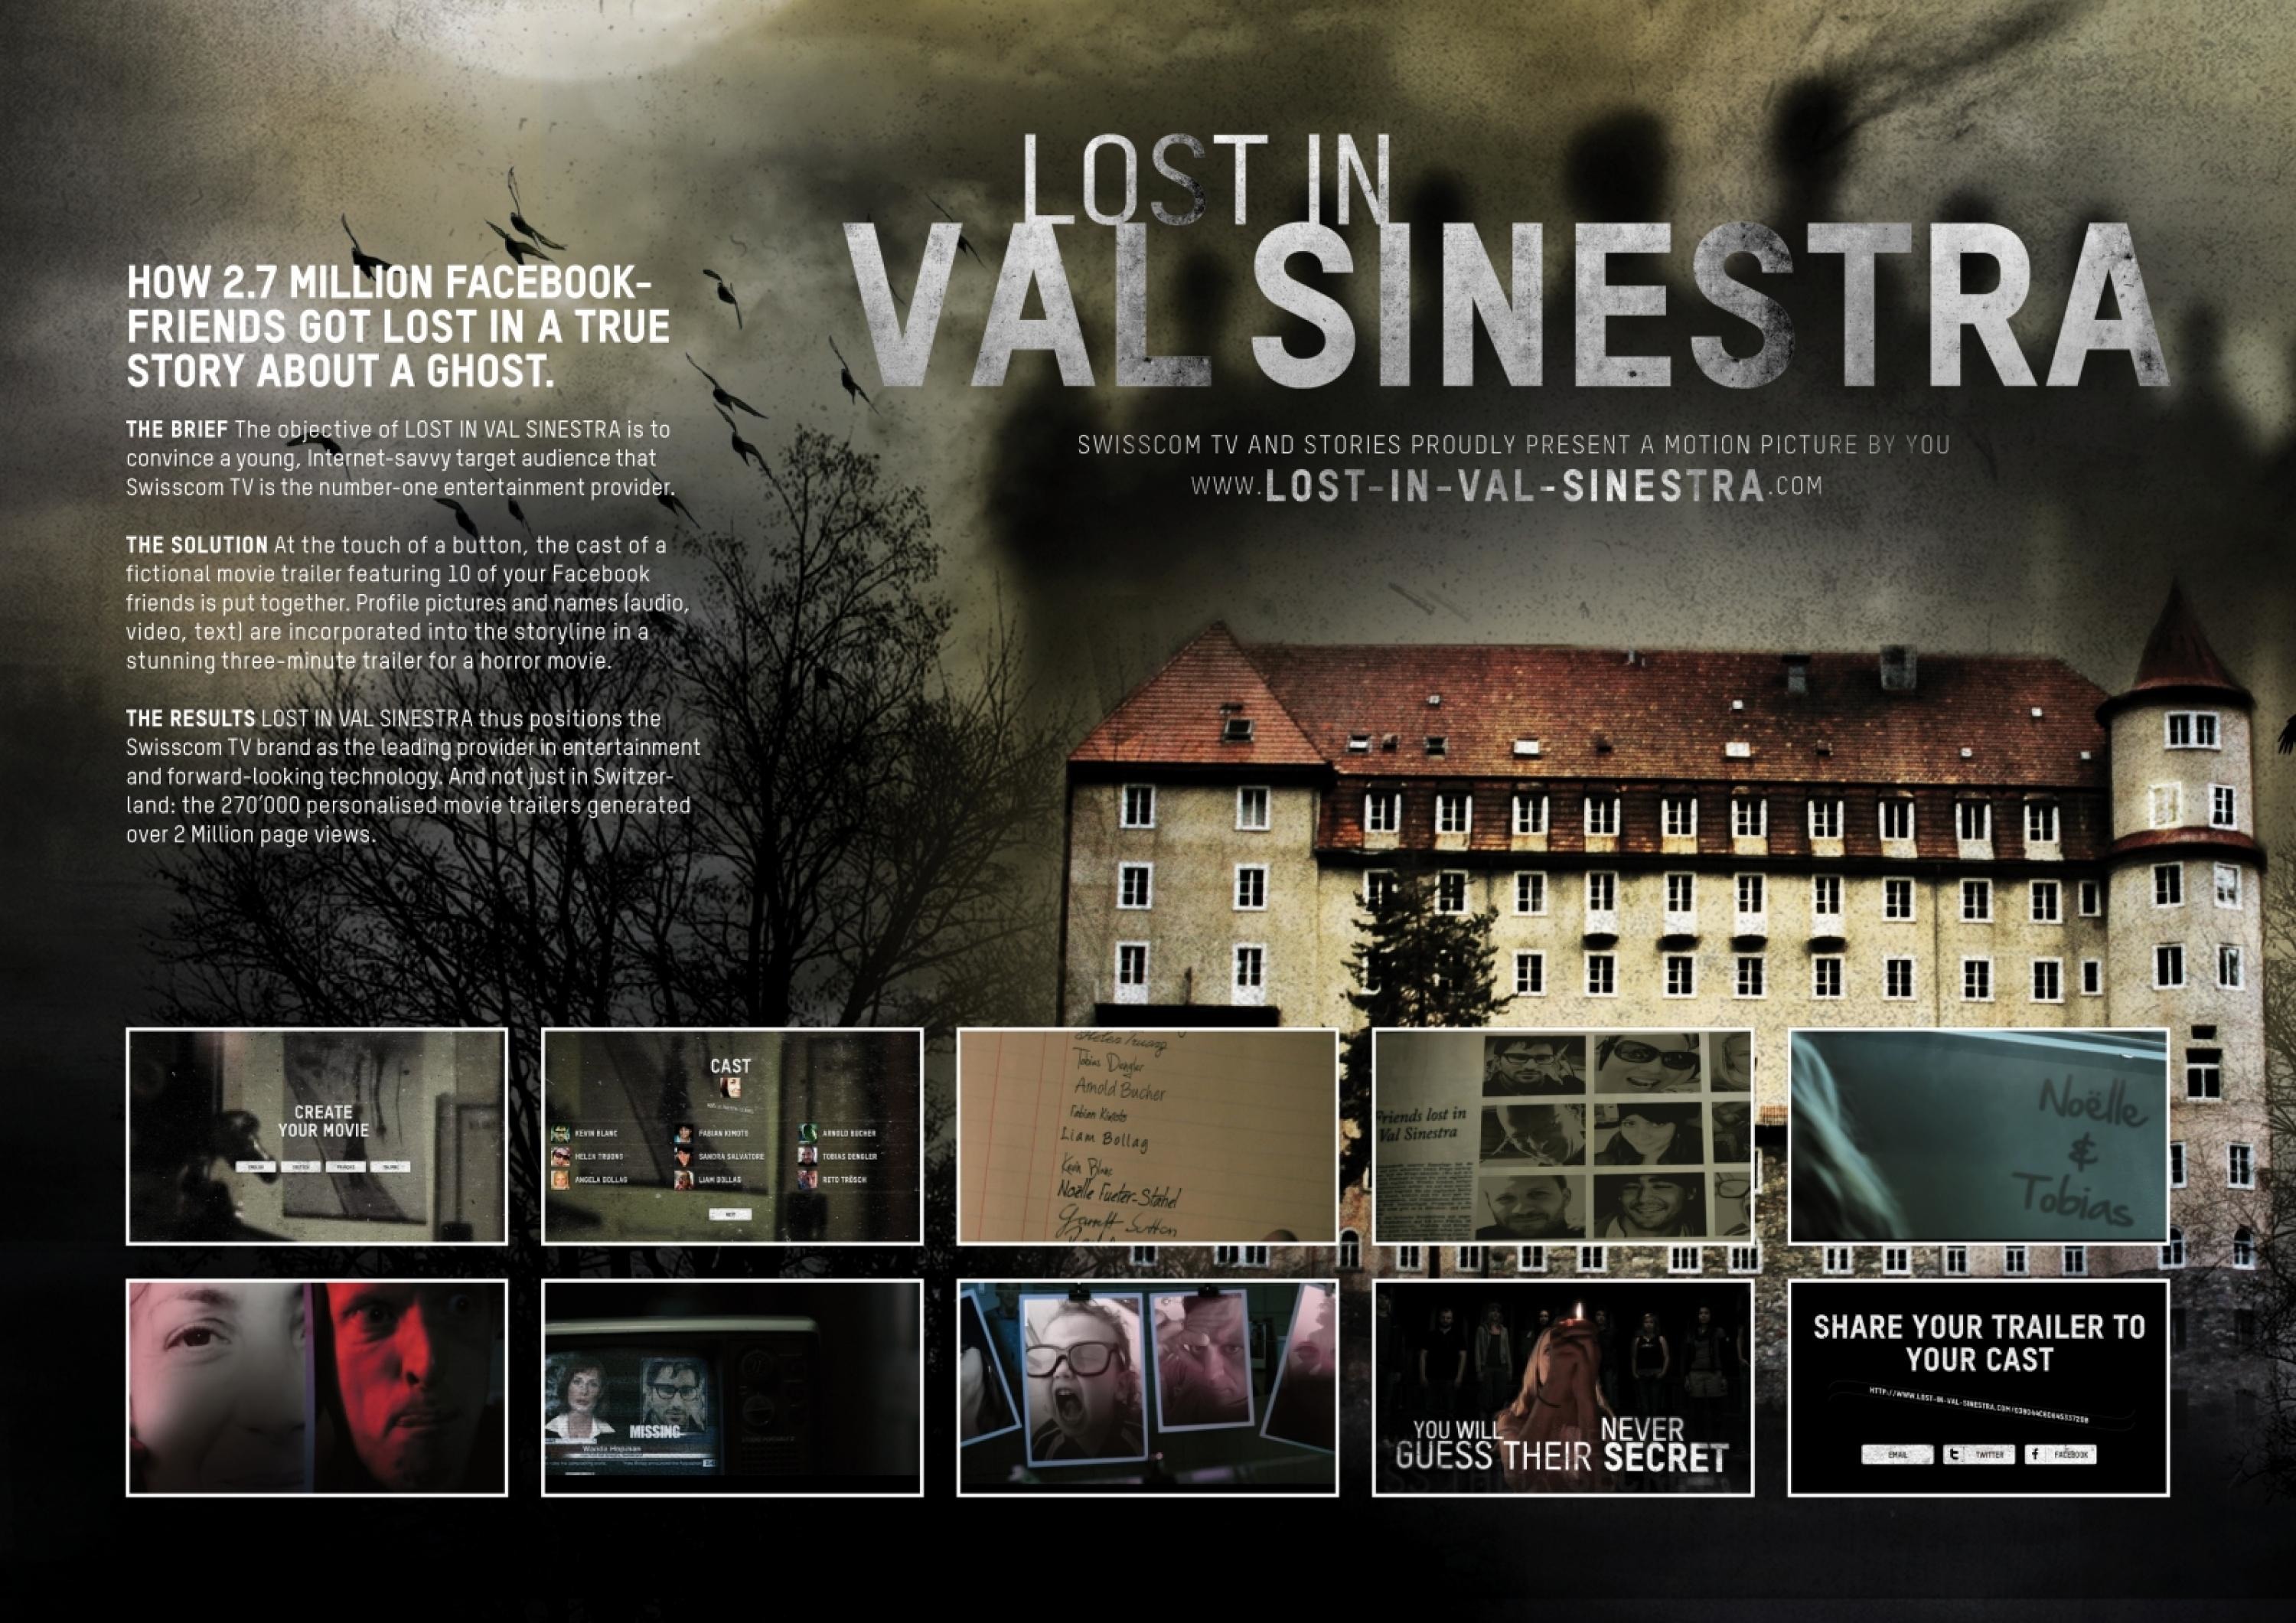 LOST IN VAL SINESTRA